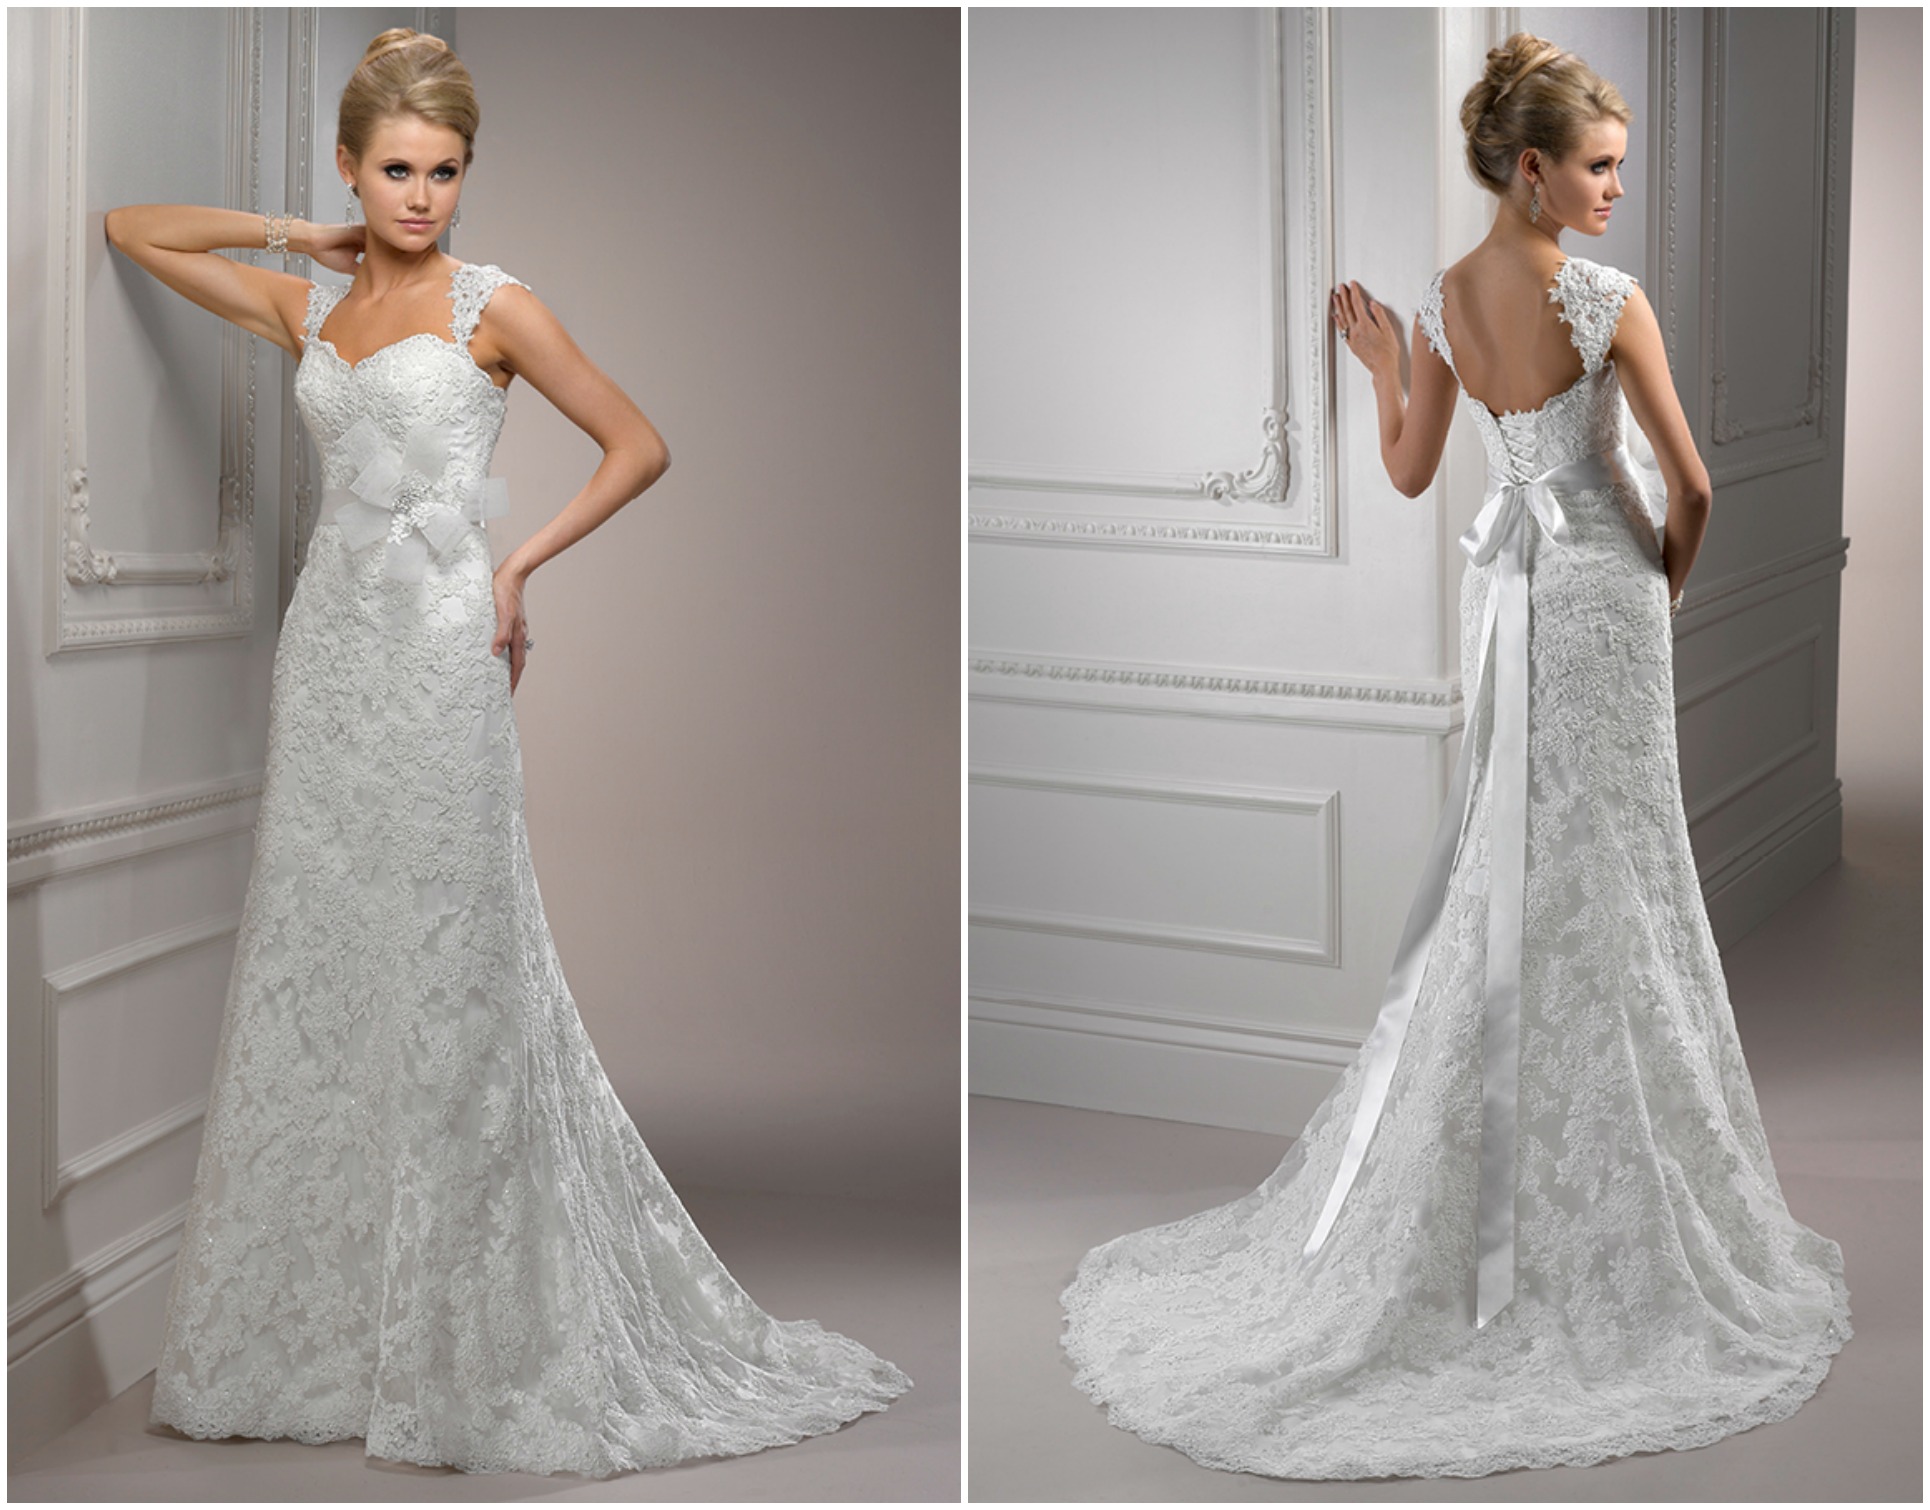 <a href="http://www.maggiesottero.com/dress.aspx?style=S5300" target="_blank">Maggie Sottero</a>